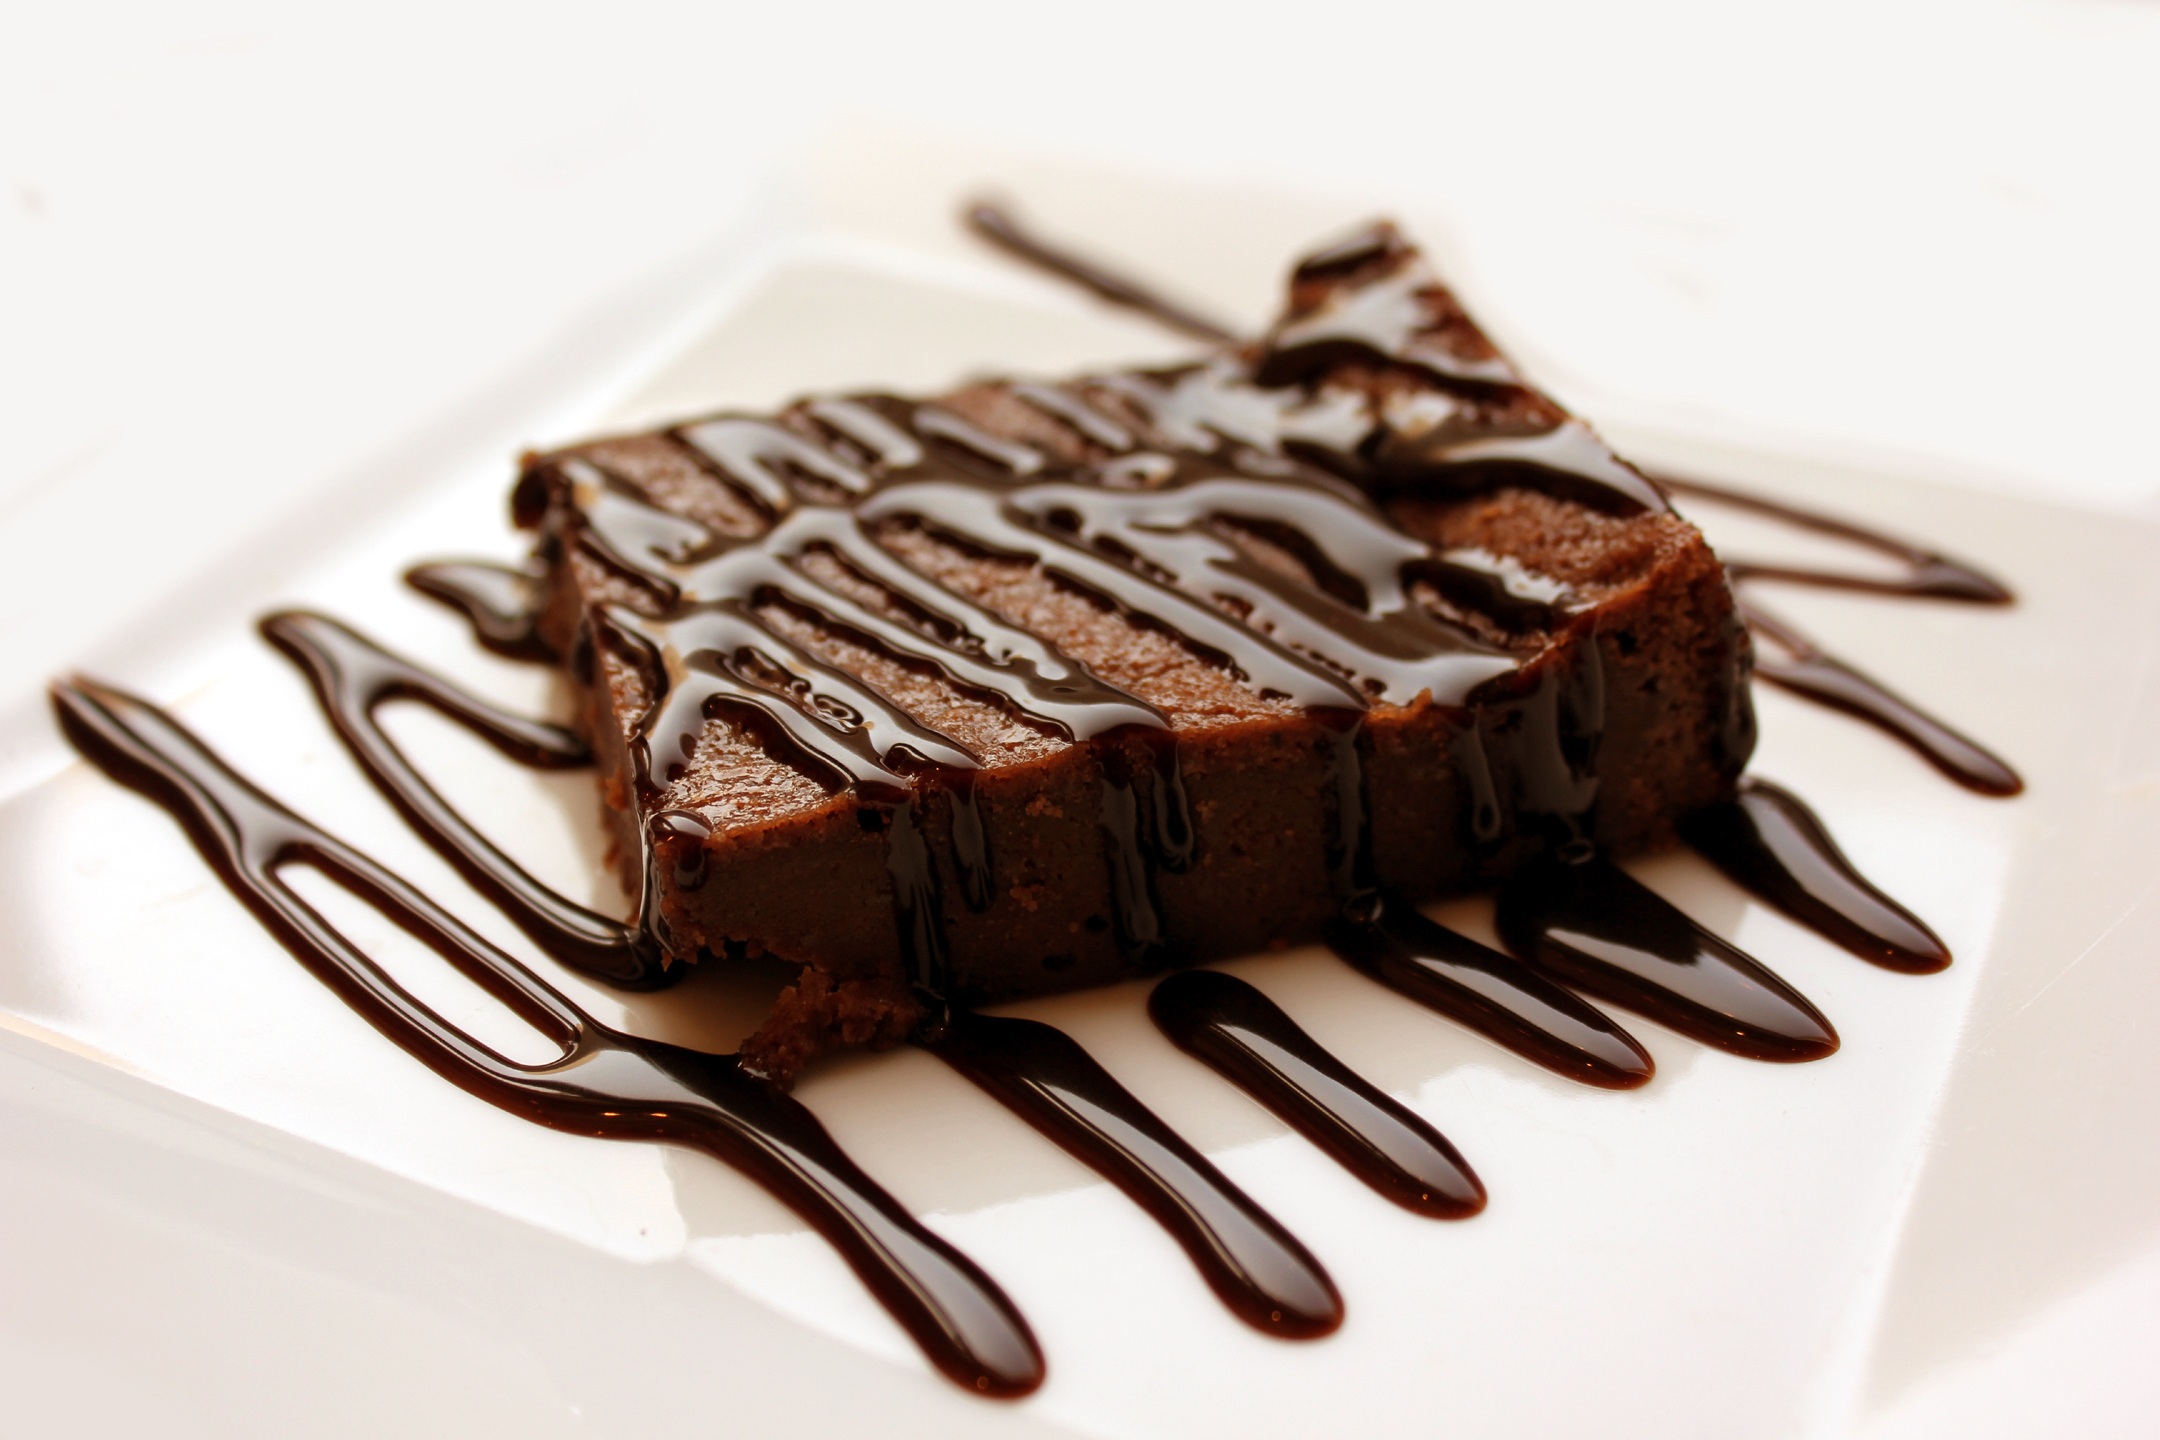 154589 Screensavers and Wallpapers Cream for phone. Download food, chocolate, desert, cream, brownie pictures for free